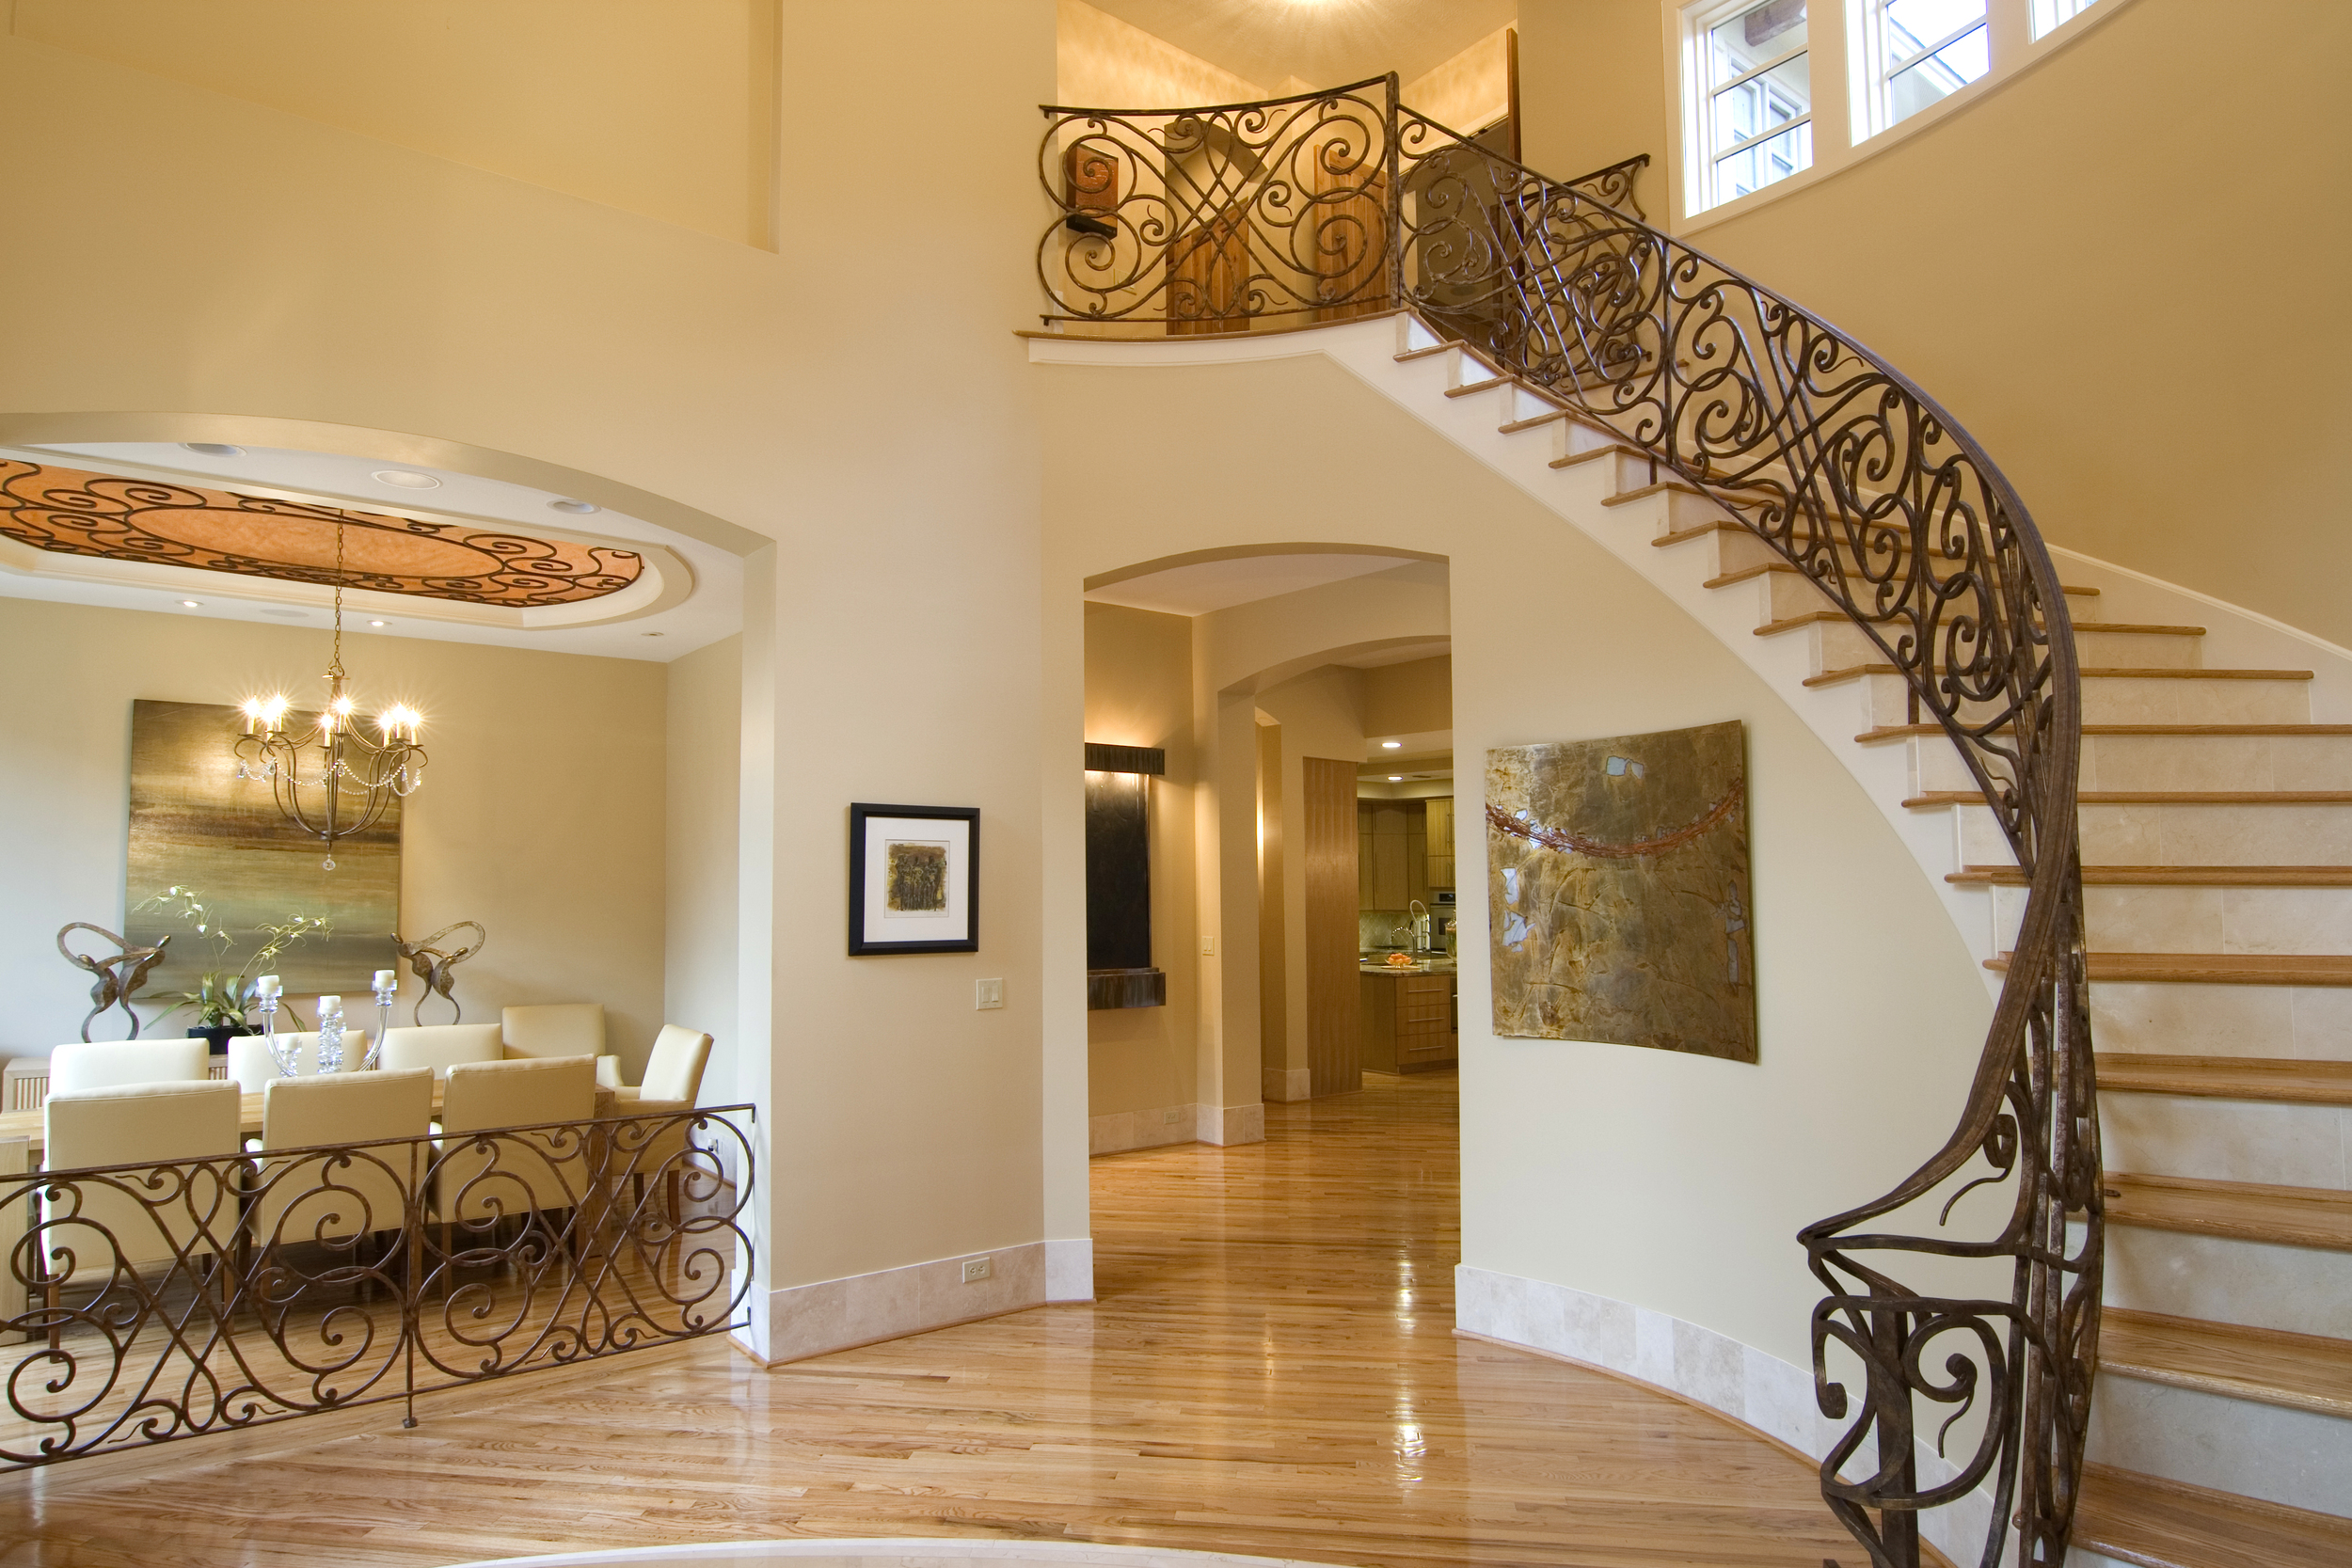 Meadow Lake  Lane - Entry looking towards Gallery, Dining Room and Staircase.jpg